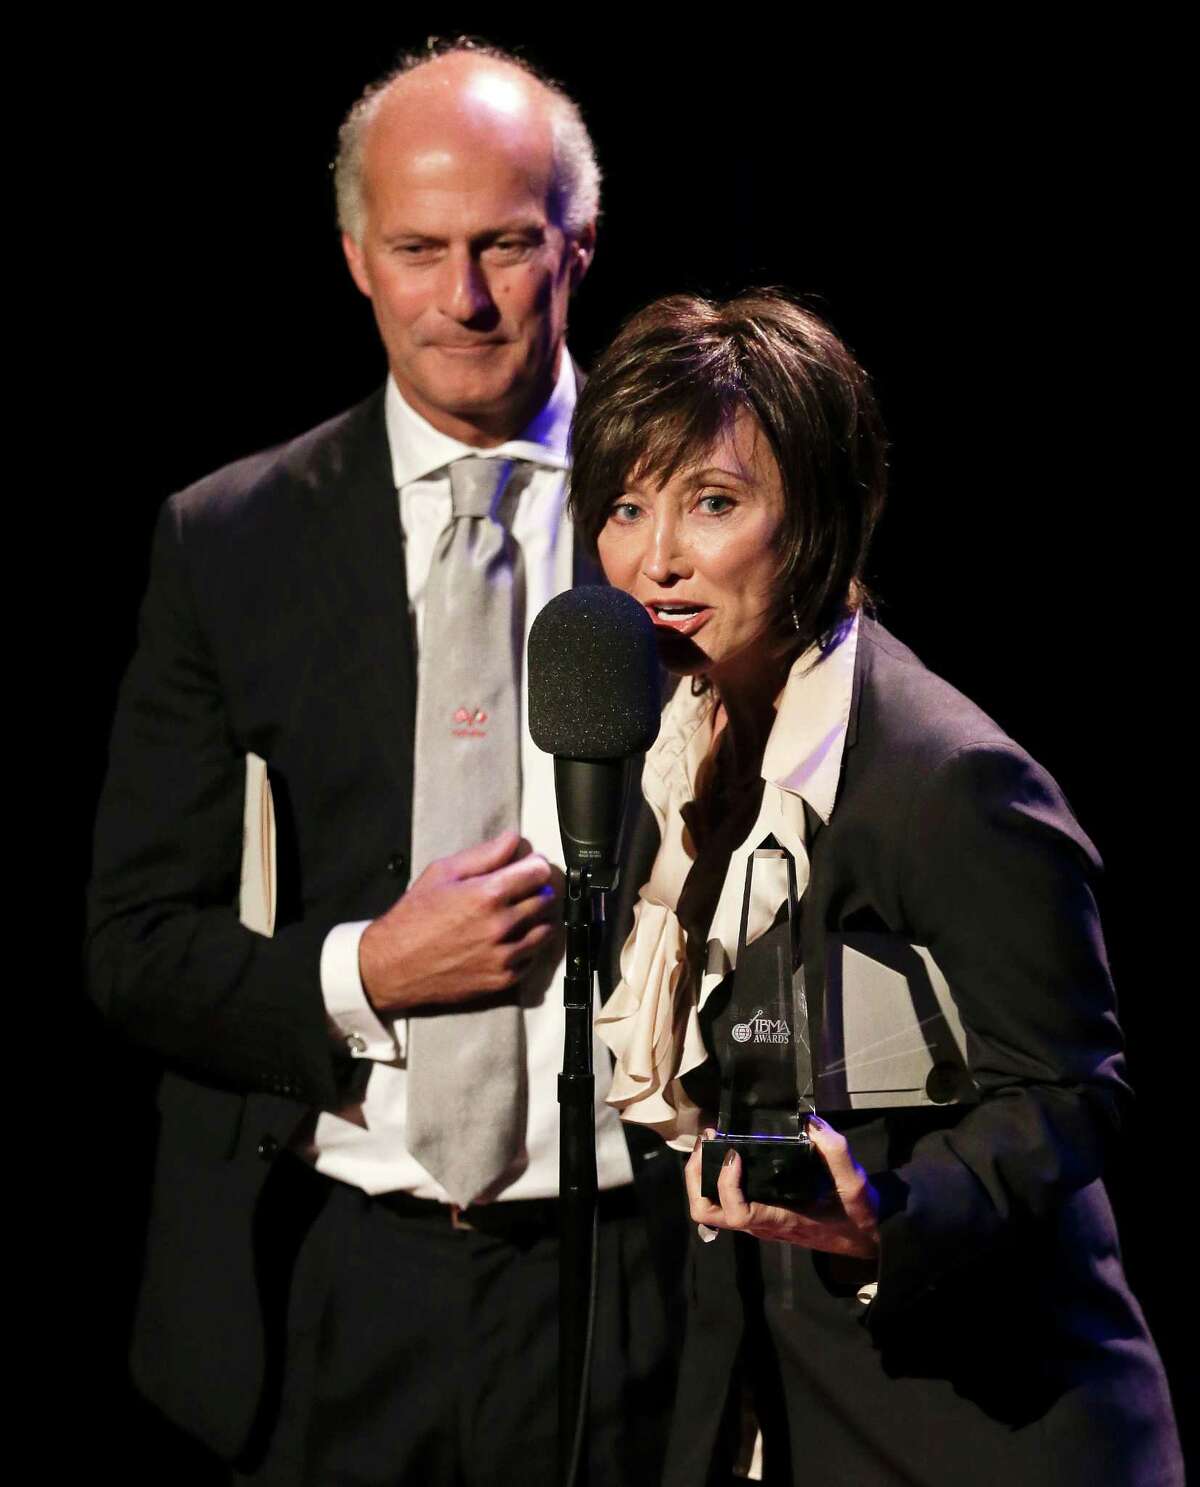 Country music star Pam Tillis and Italian bluegrass musician Martino Coppo, left, accept the guitar player of the year award on behalf of the late Doc Watson at the International Bluegrass Music Association Awards show on Thursday, Sept. 27, 2012, in Nashville, Tenn. (AP Photo/Mark Humphrey)